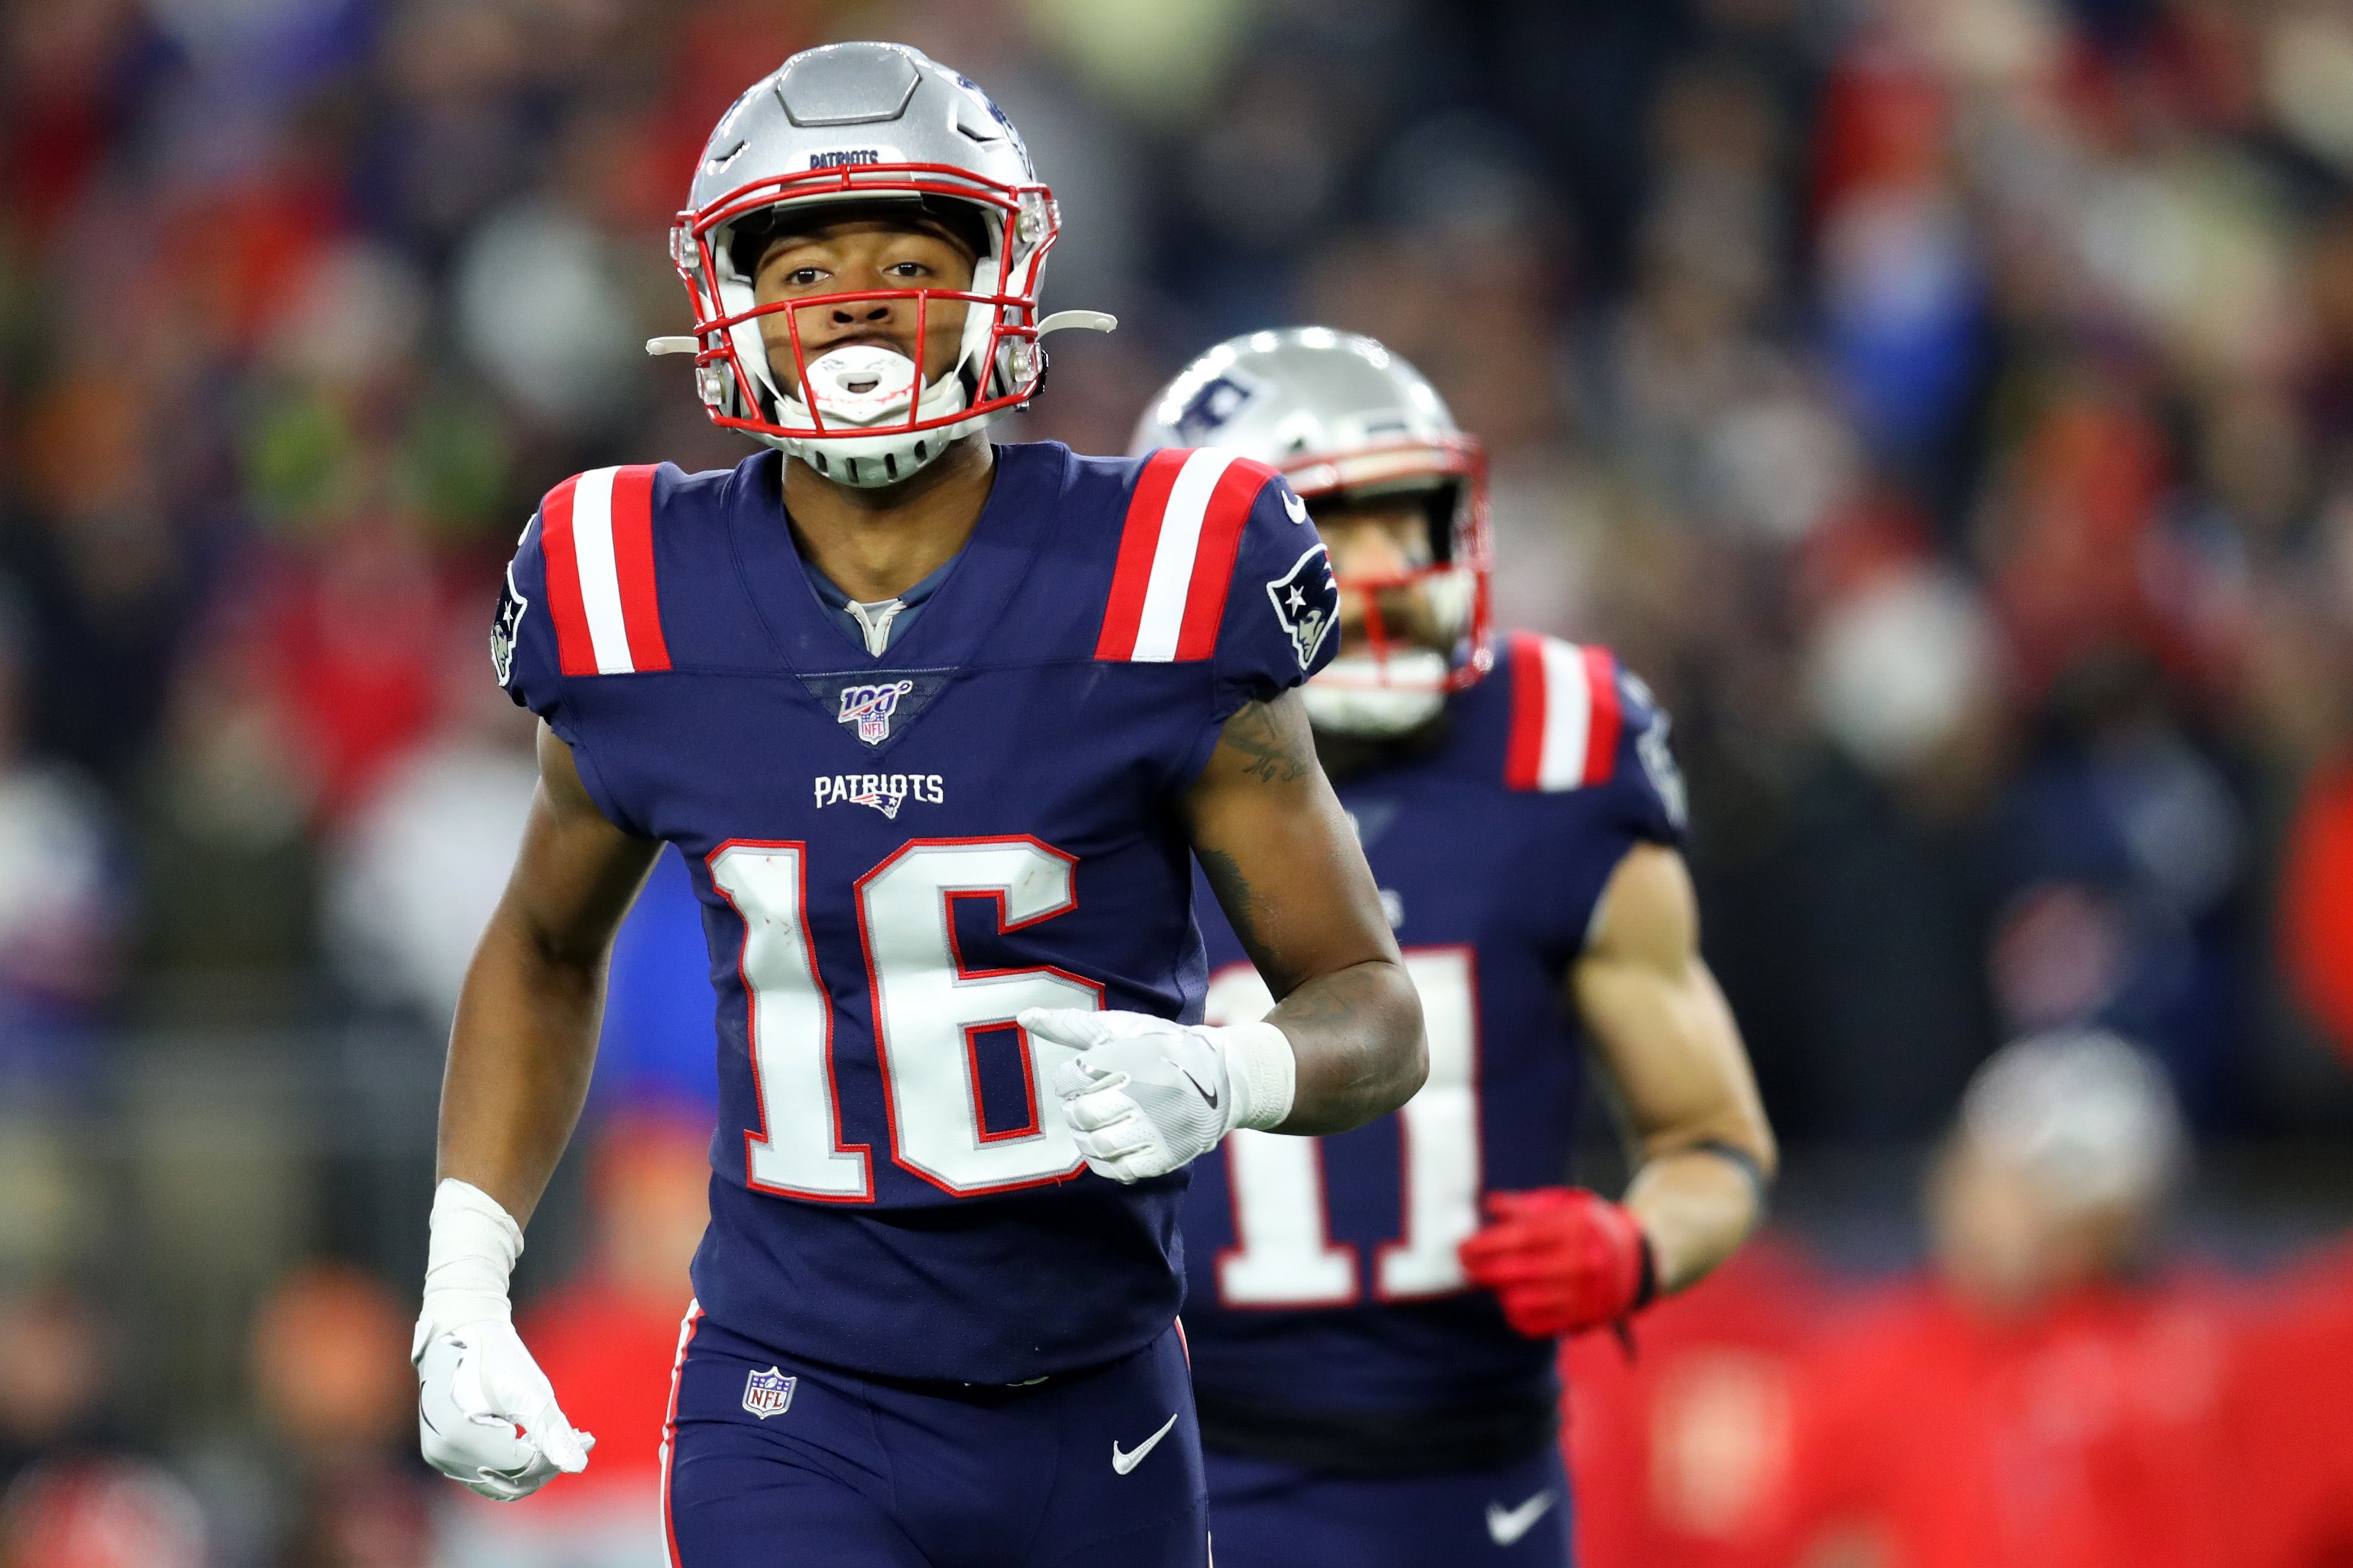 Unheralded New England Patriots WR Jakobi Meyers eager to make an